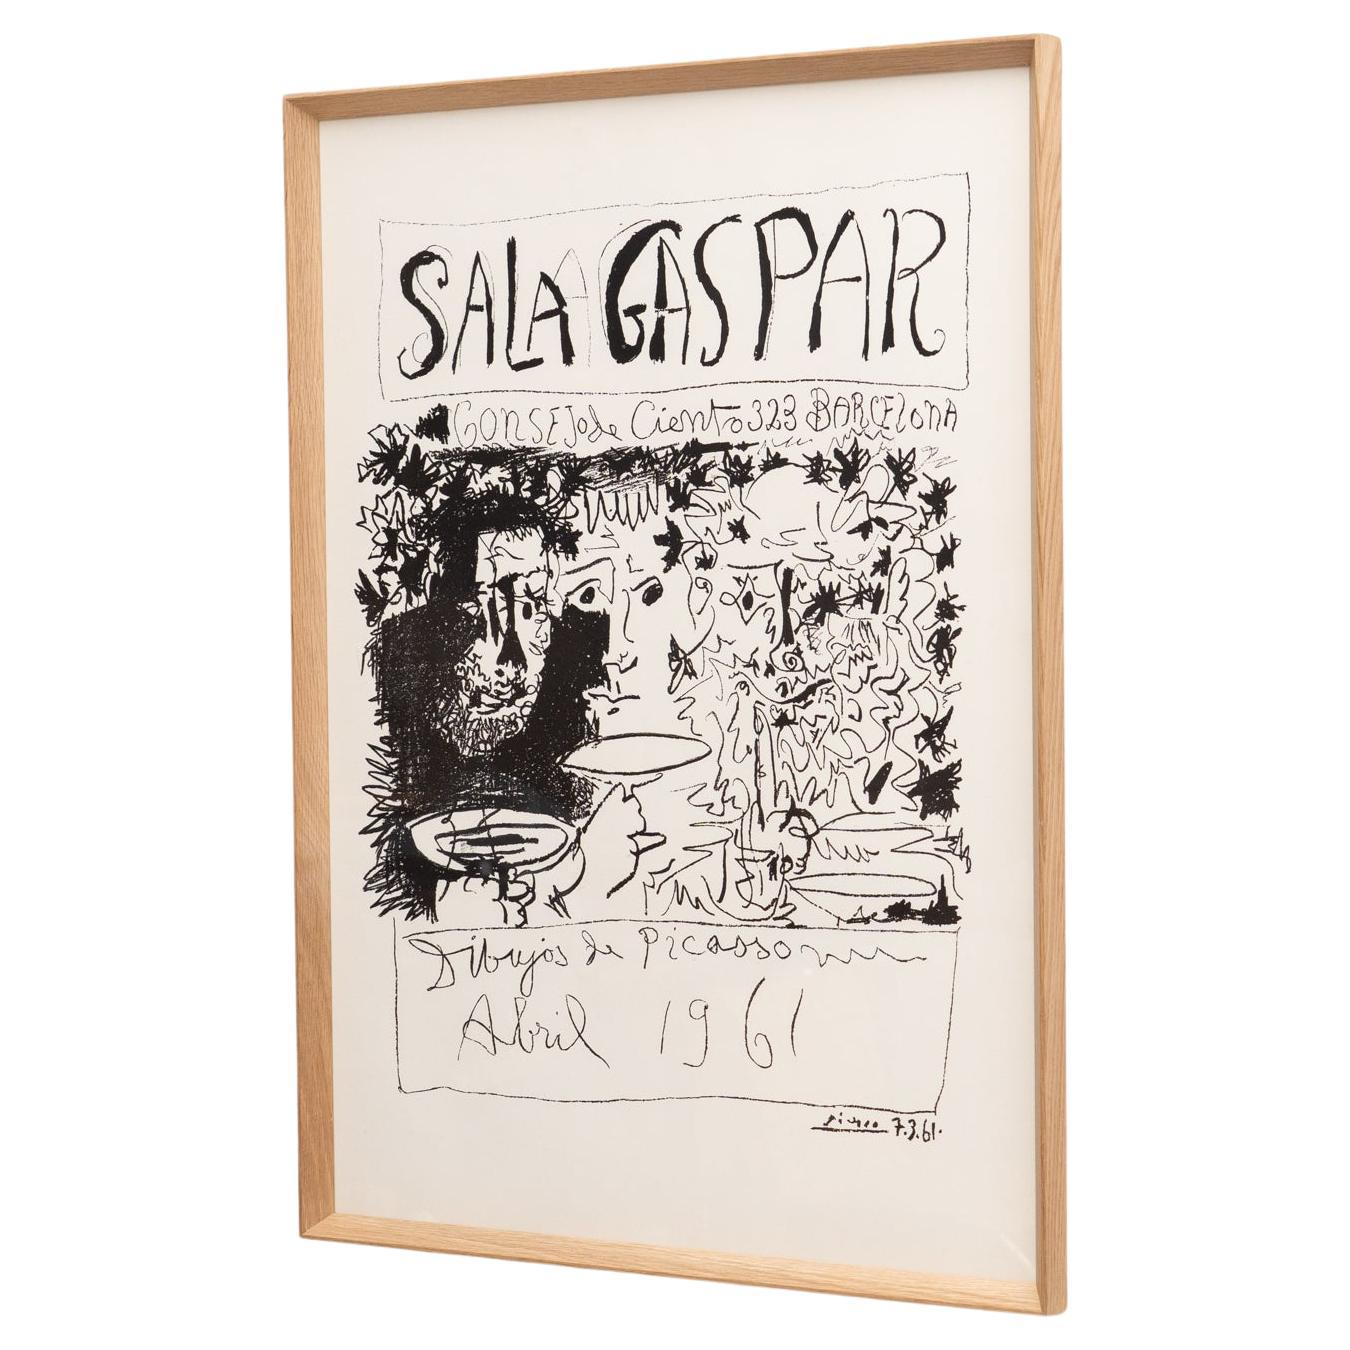 Historical Lithographic Framed Poster of Drawings by Picasso, circa 1961 For Sale